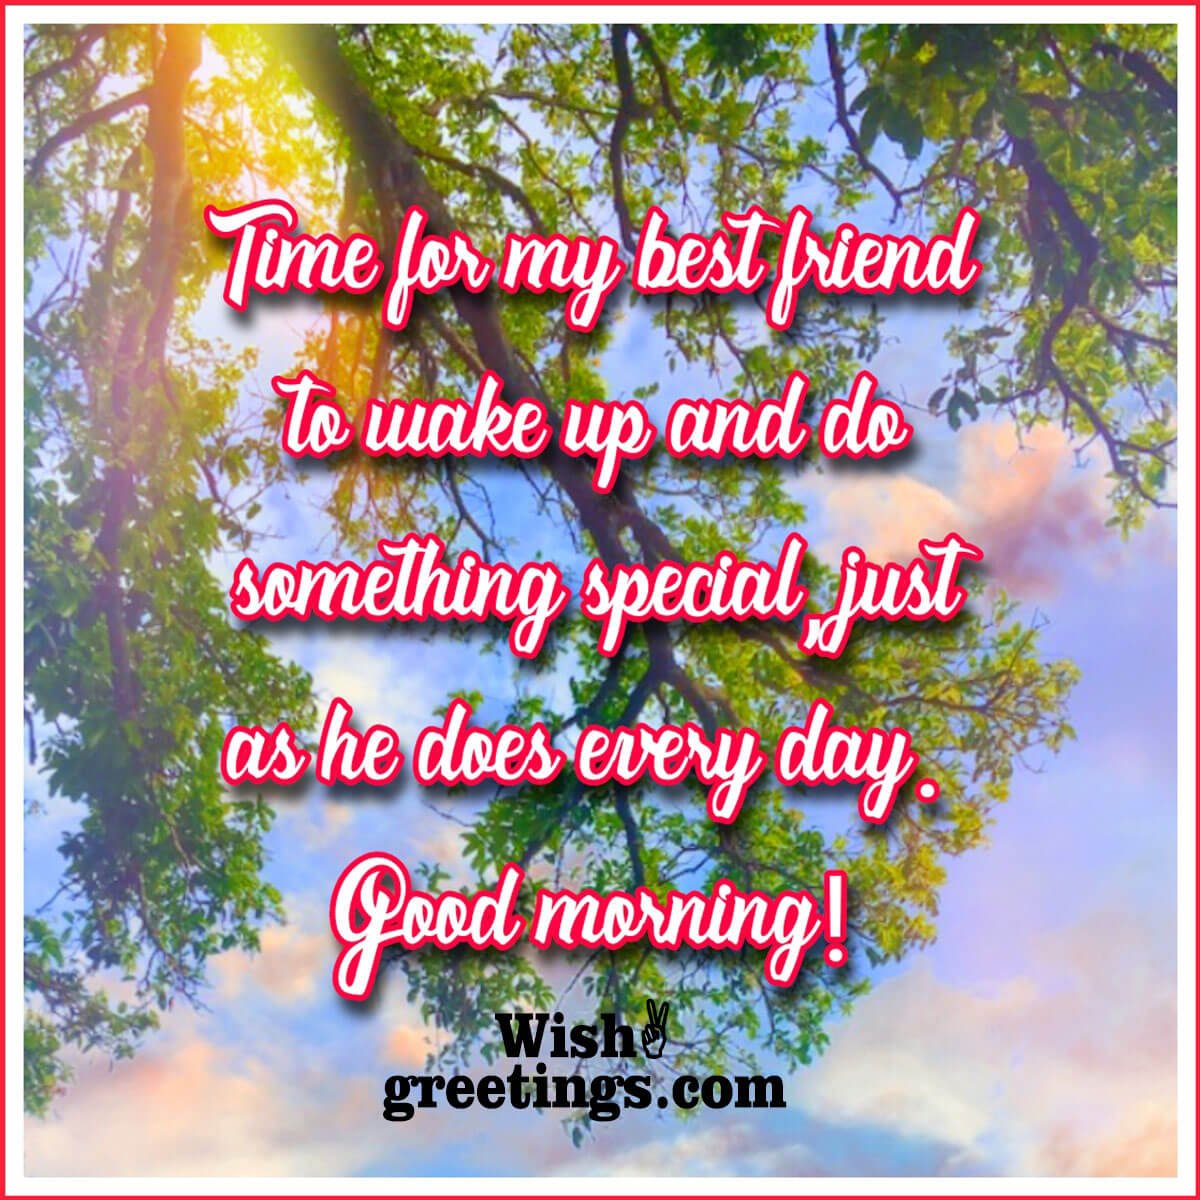 Good Morning Wishes For Best Friends - Wish Greetings